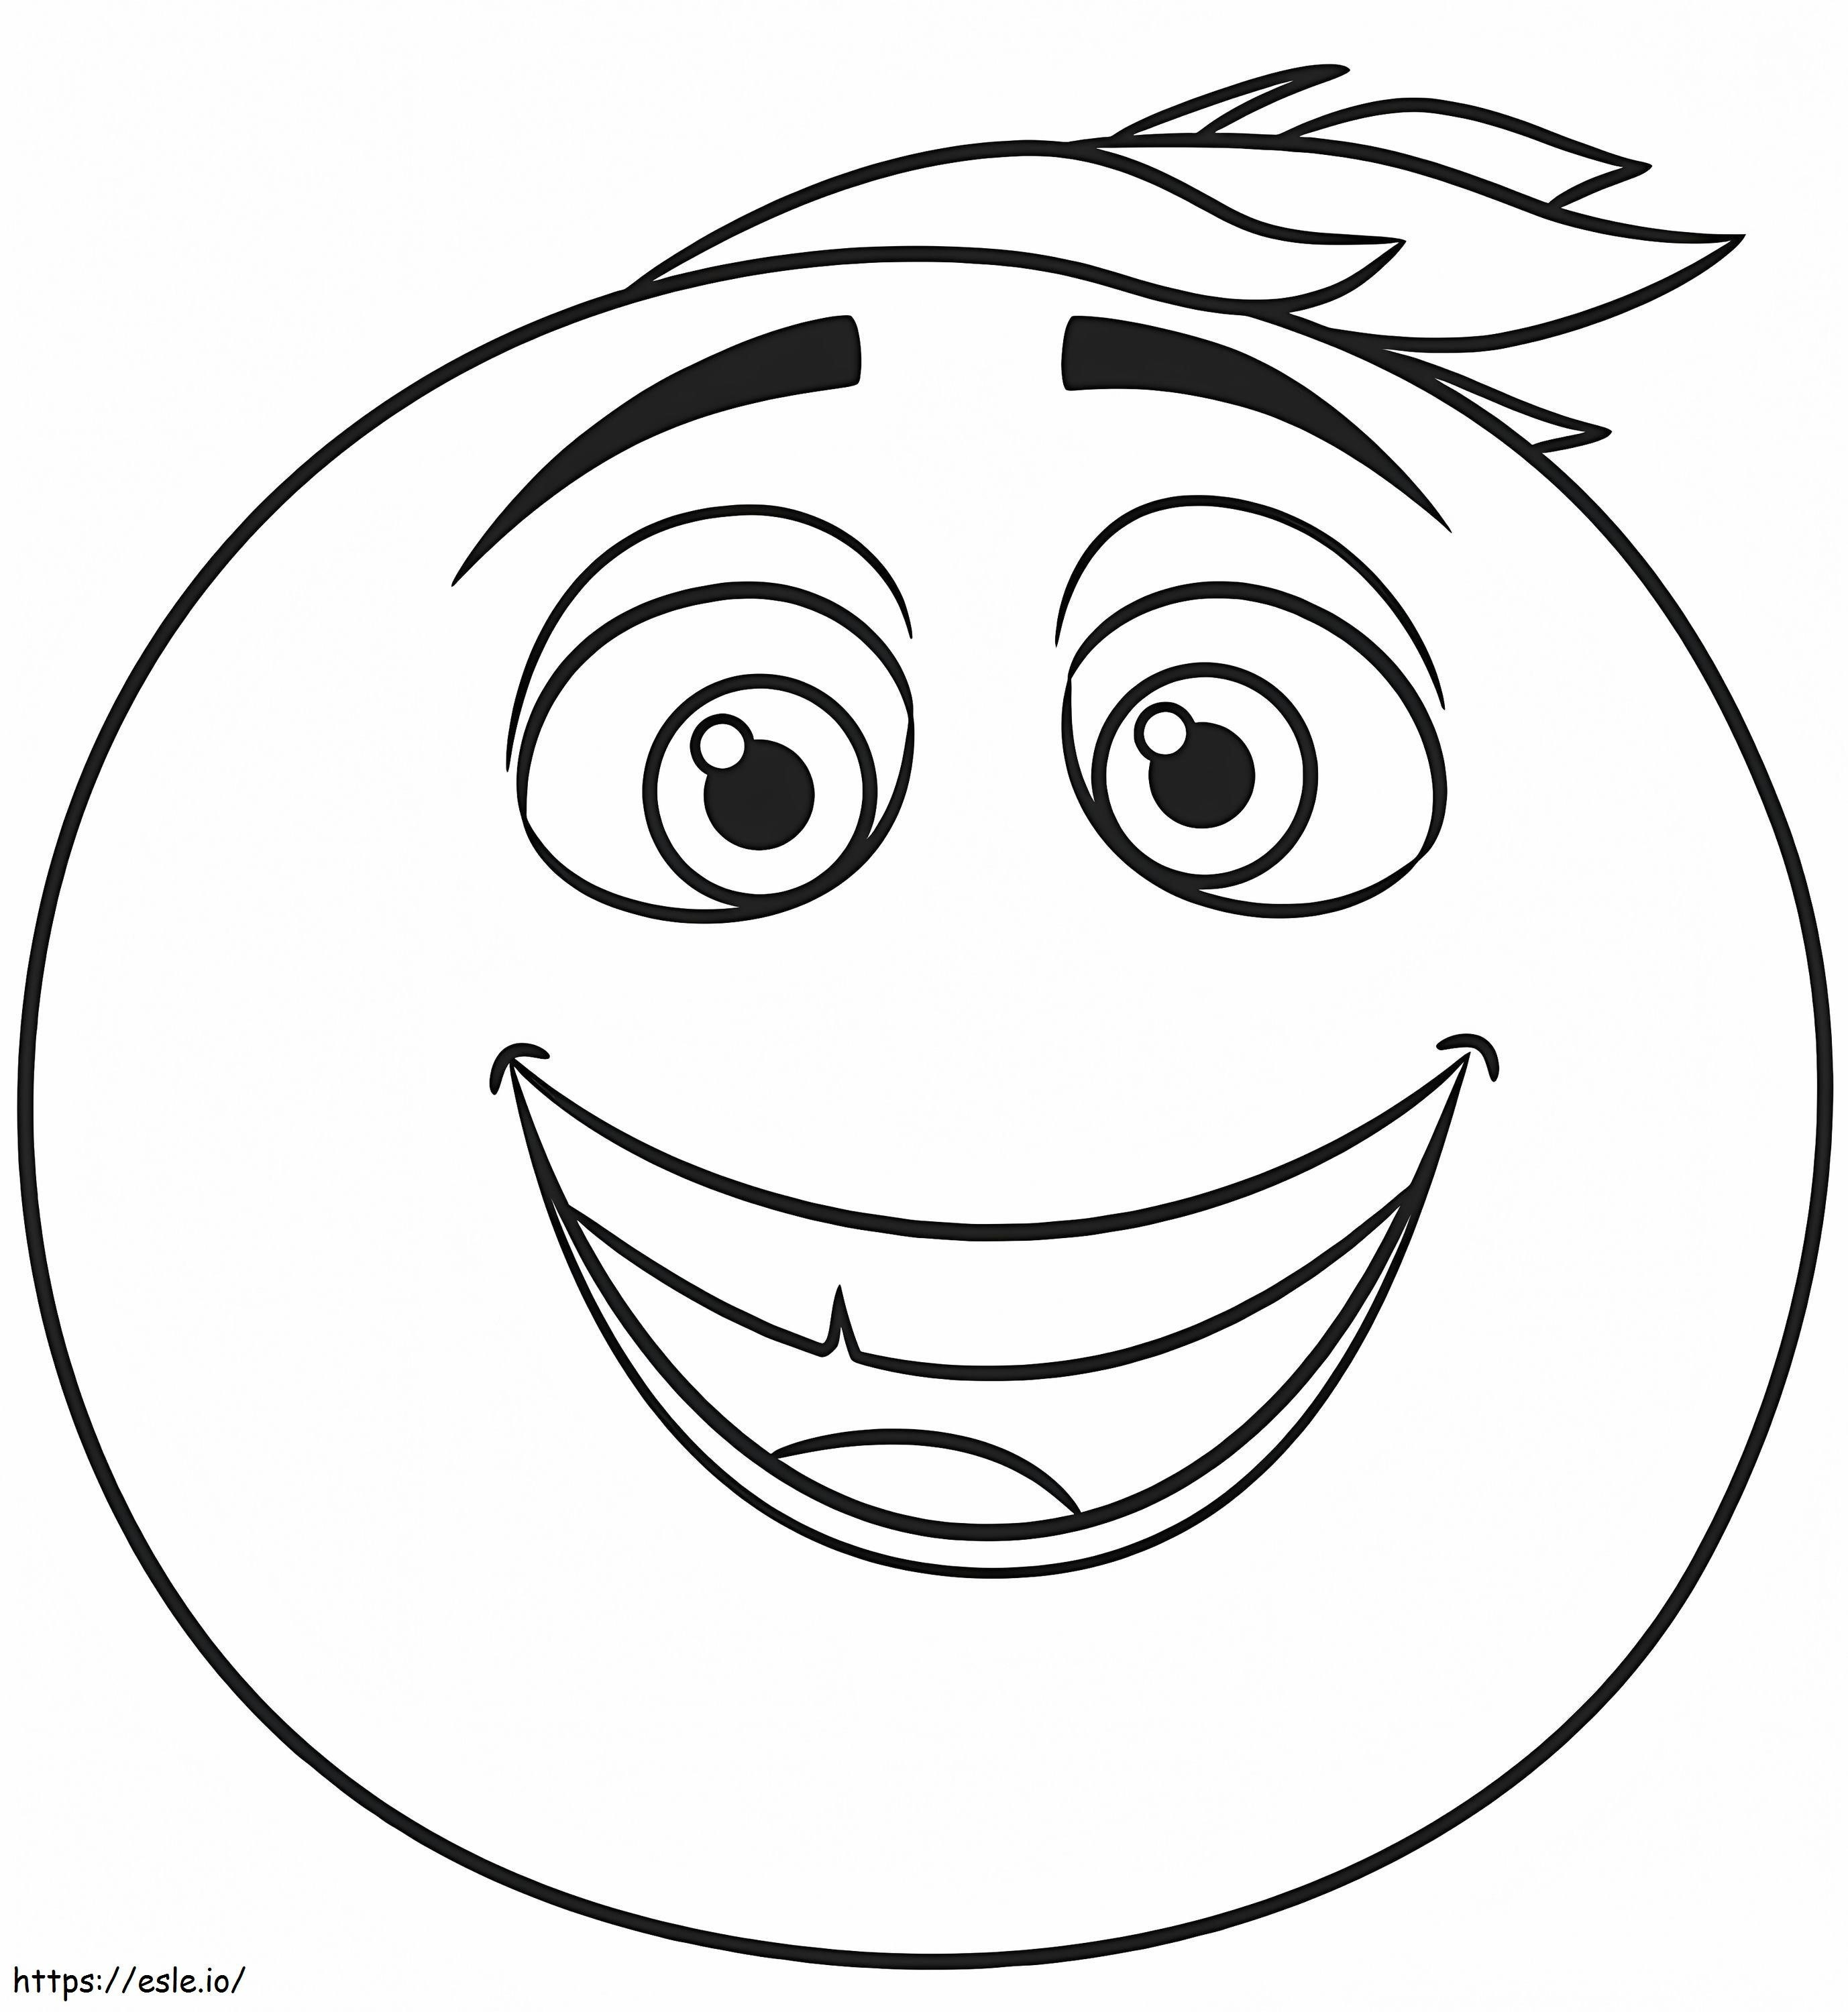 Gene From The Emoji Movie coloring page